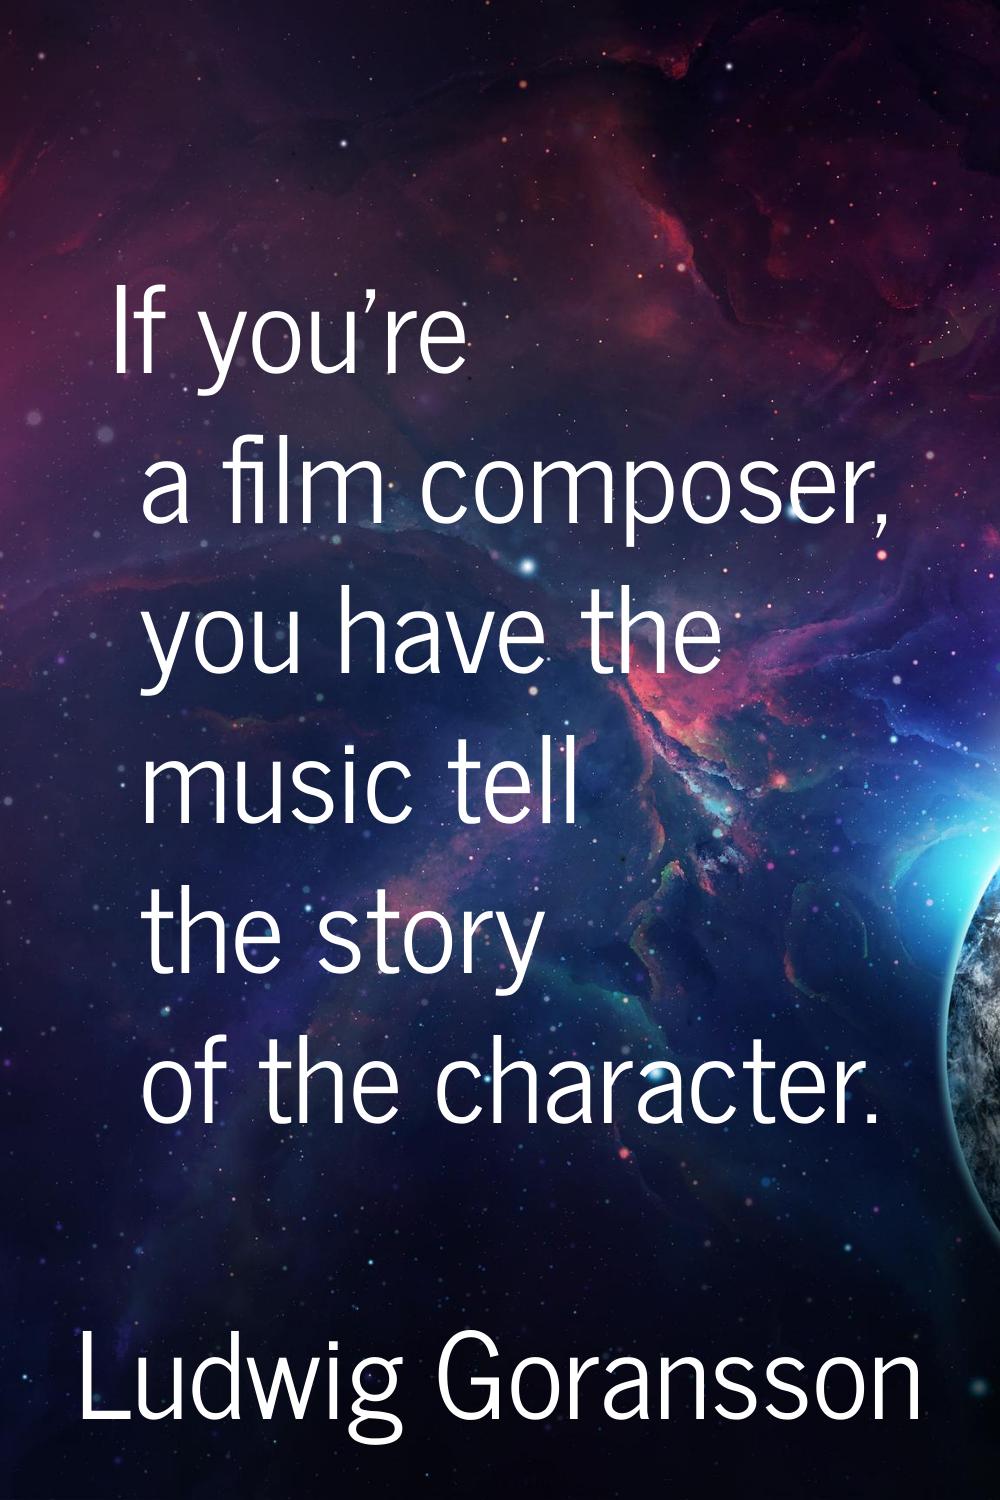 If you're a film composer, you have the music tell the story of the character.